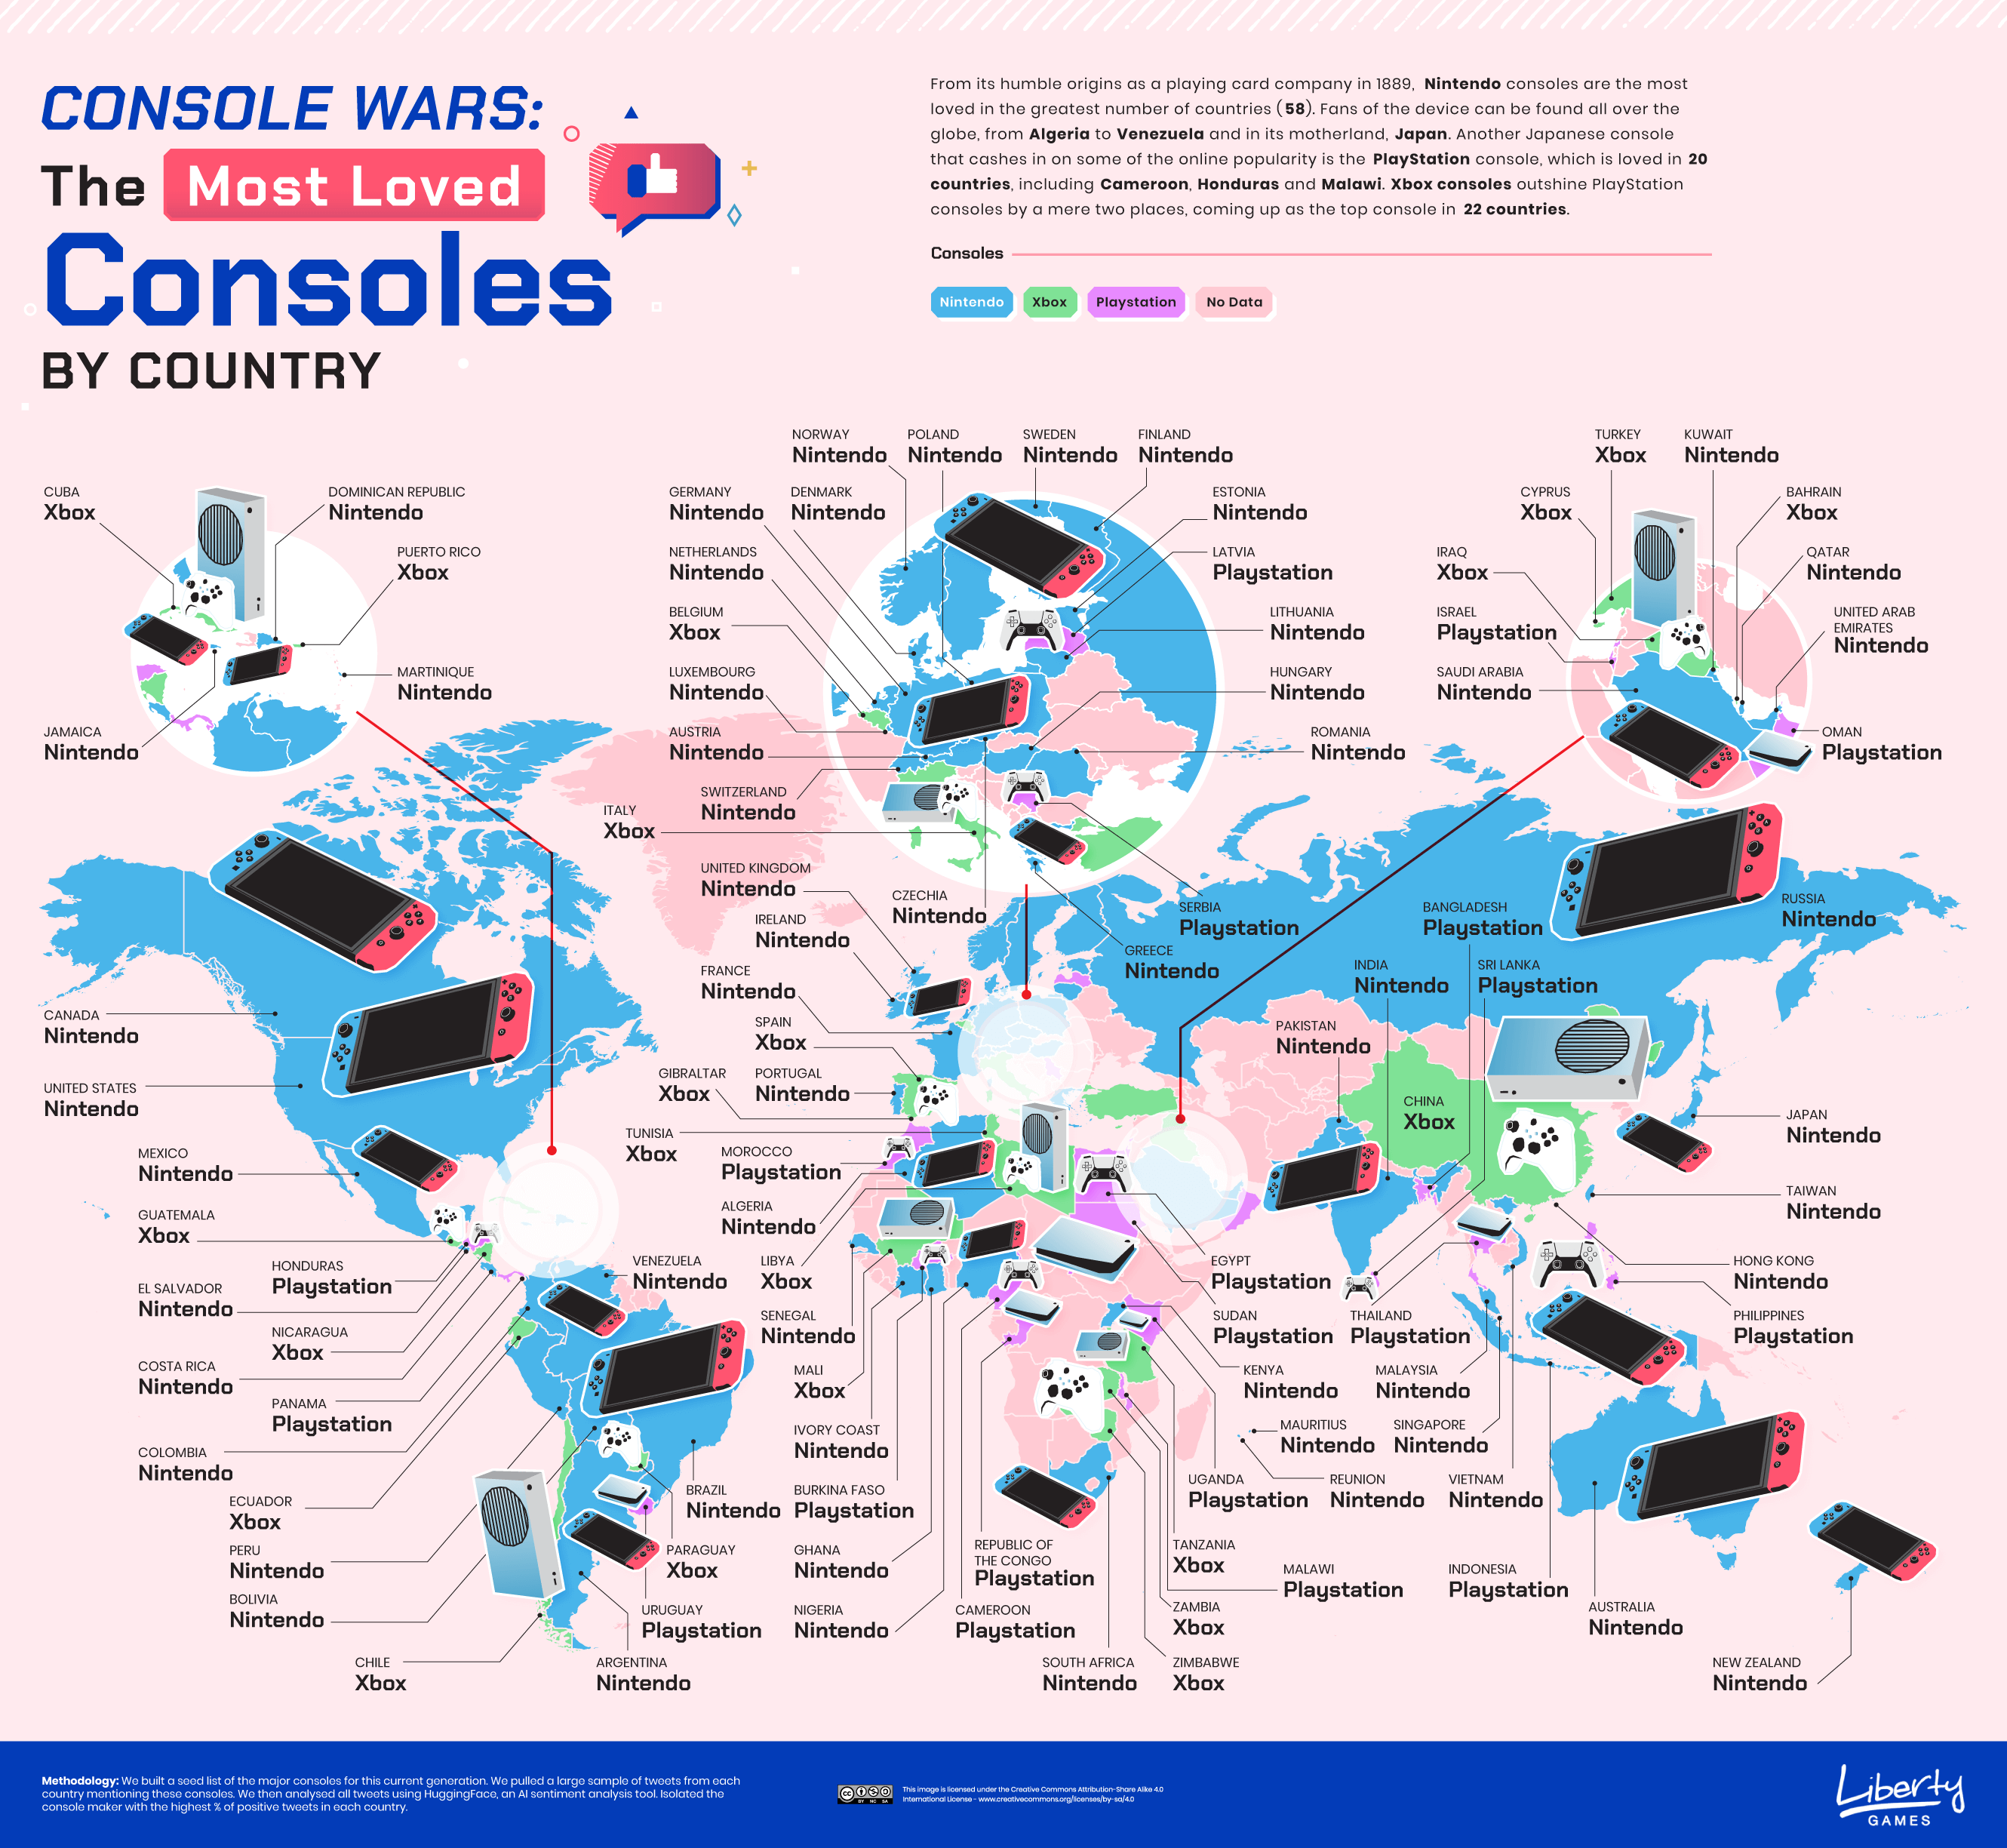 The most loved consoles world map